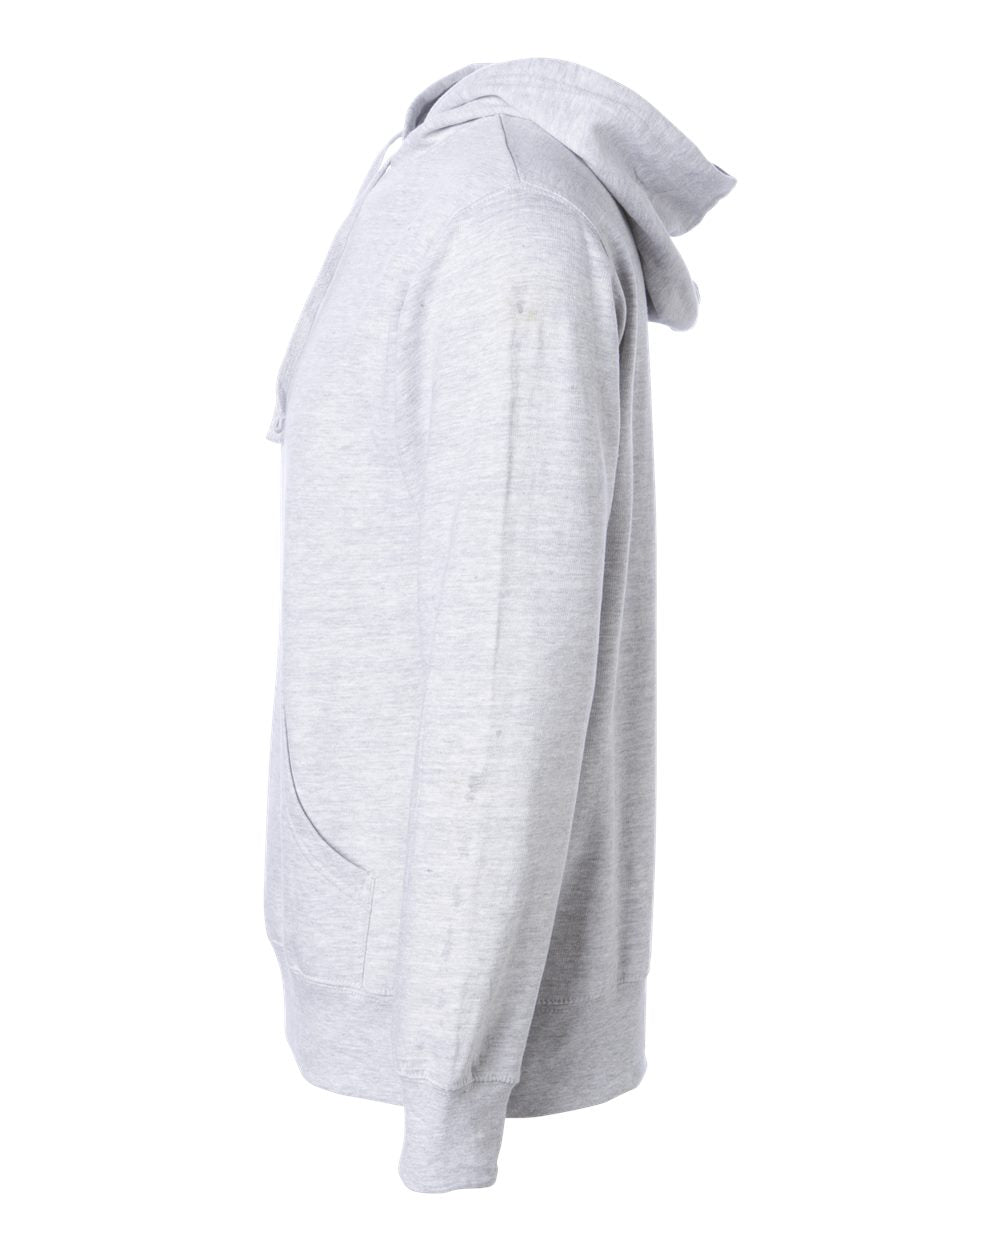 Independent Trading Co. Midweight Hooded Sweatshirt SS4500 #color_Grey Heather